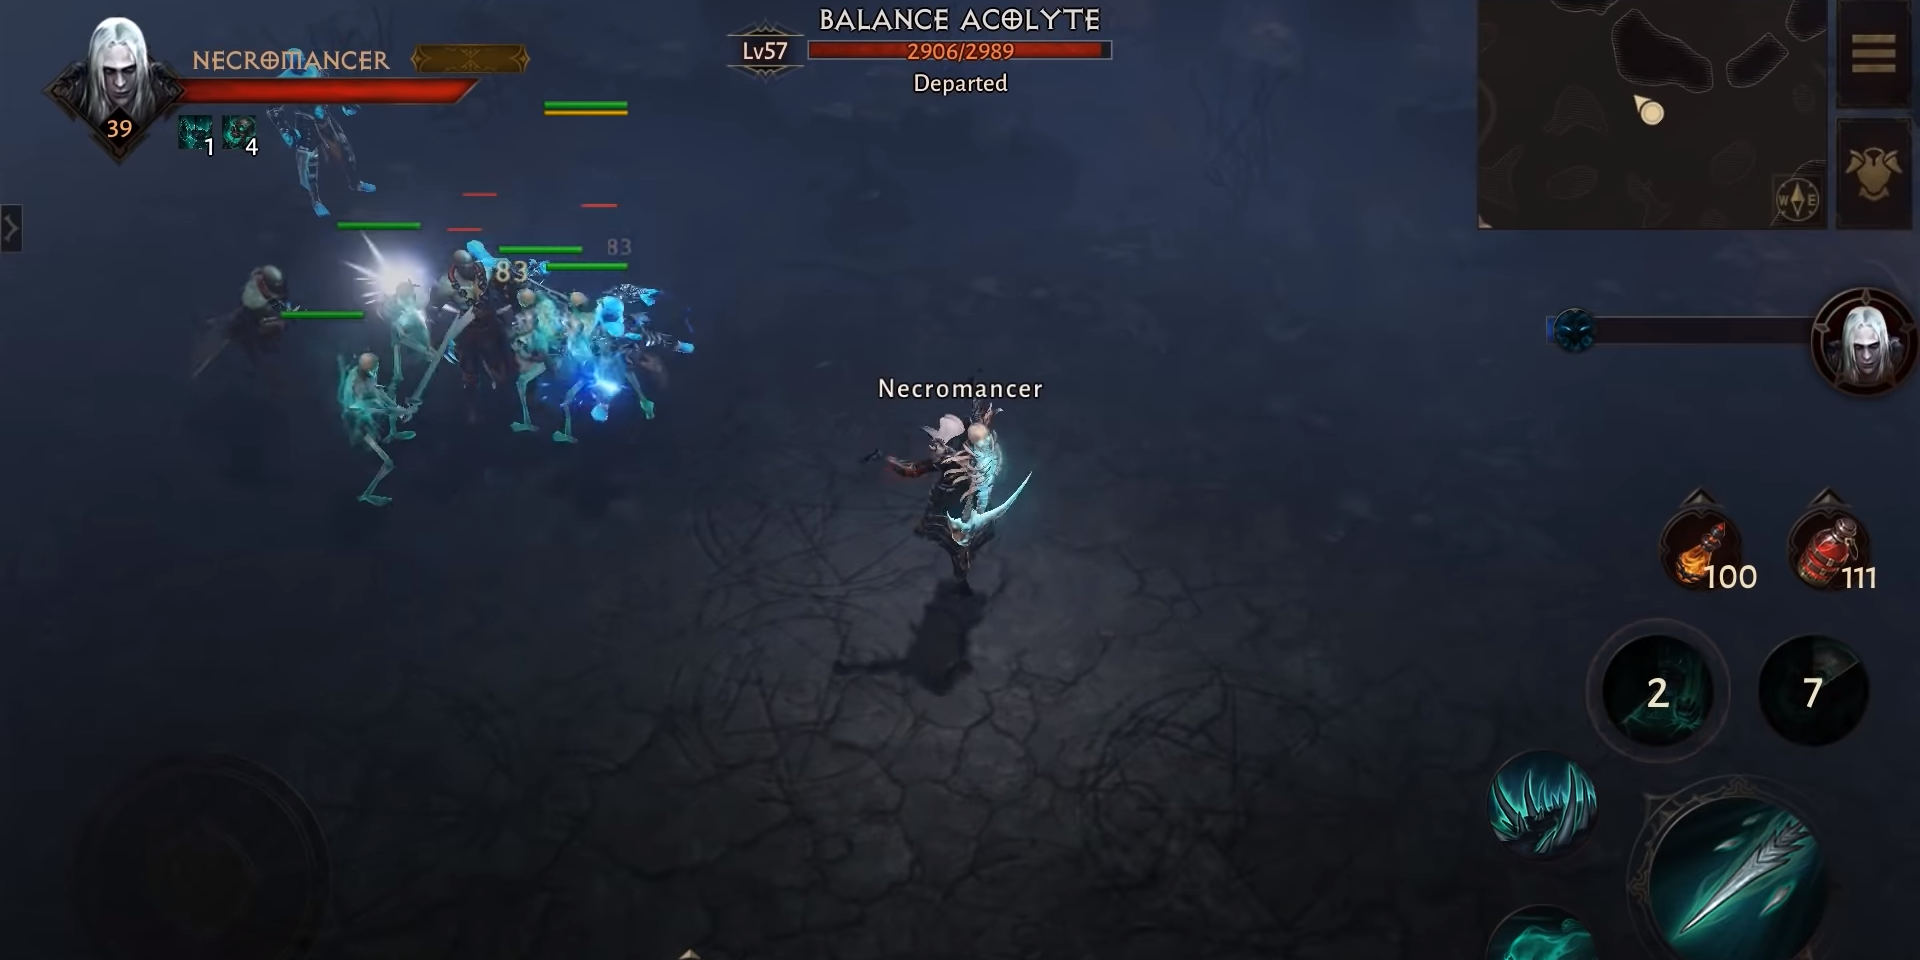 Image of gameplay from the gameplay trailer of Diablo Immortal.